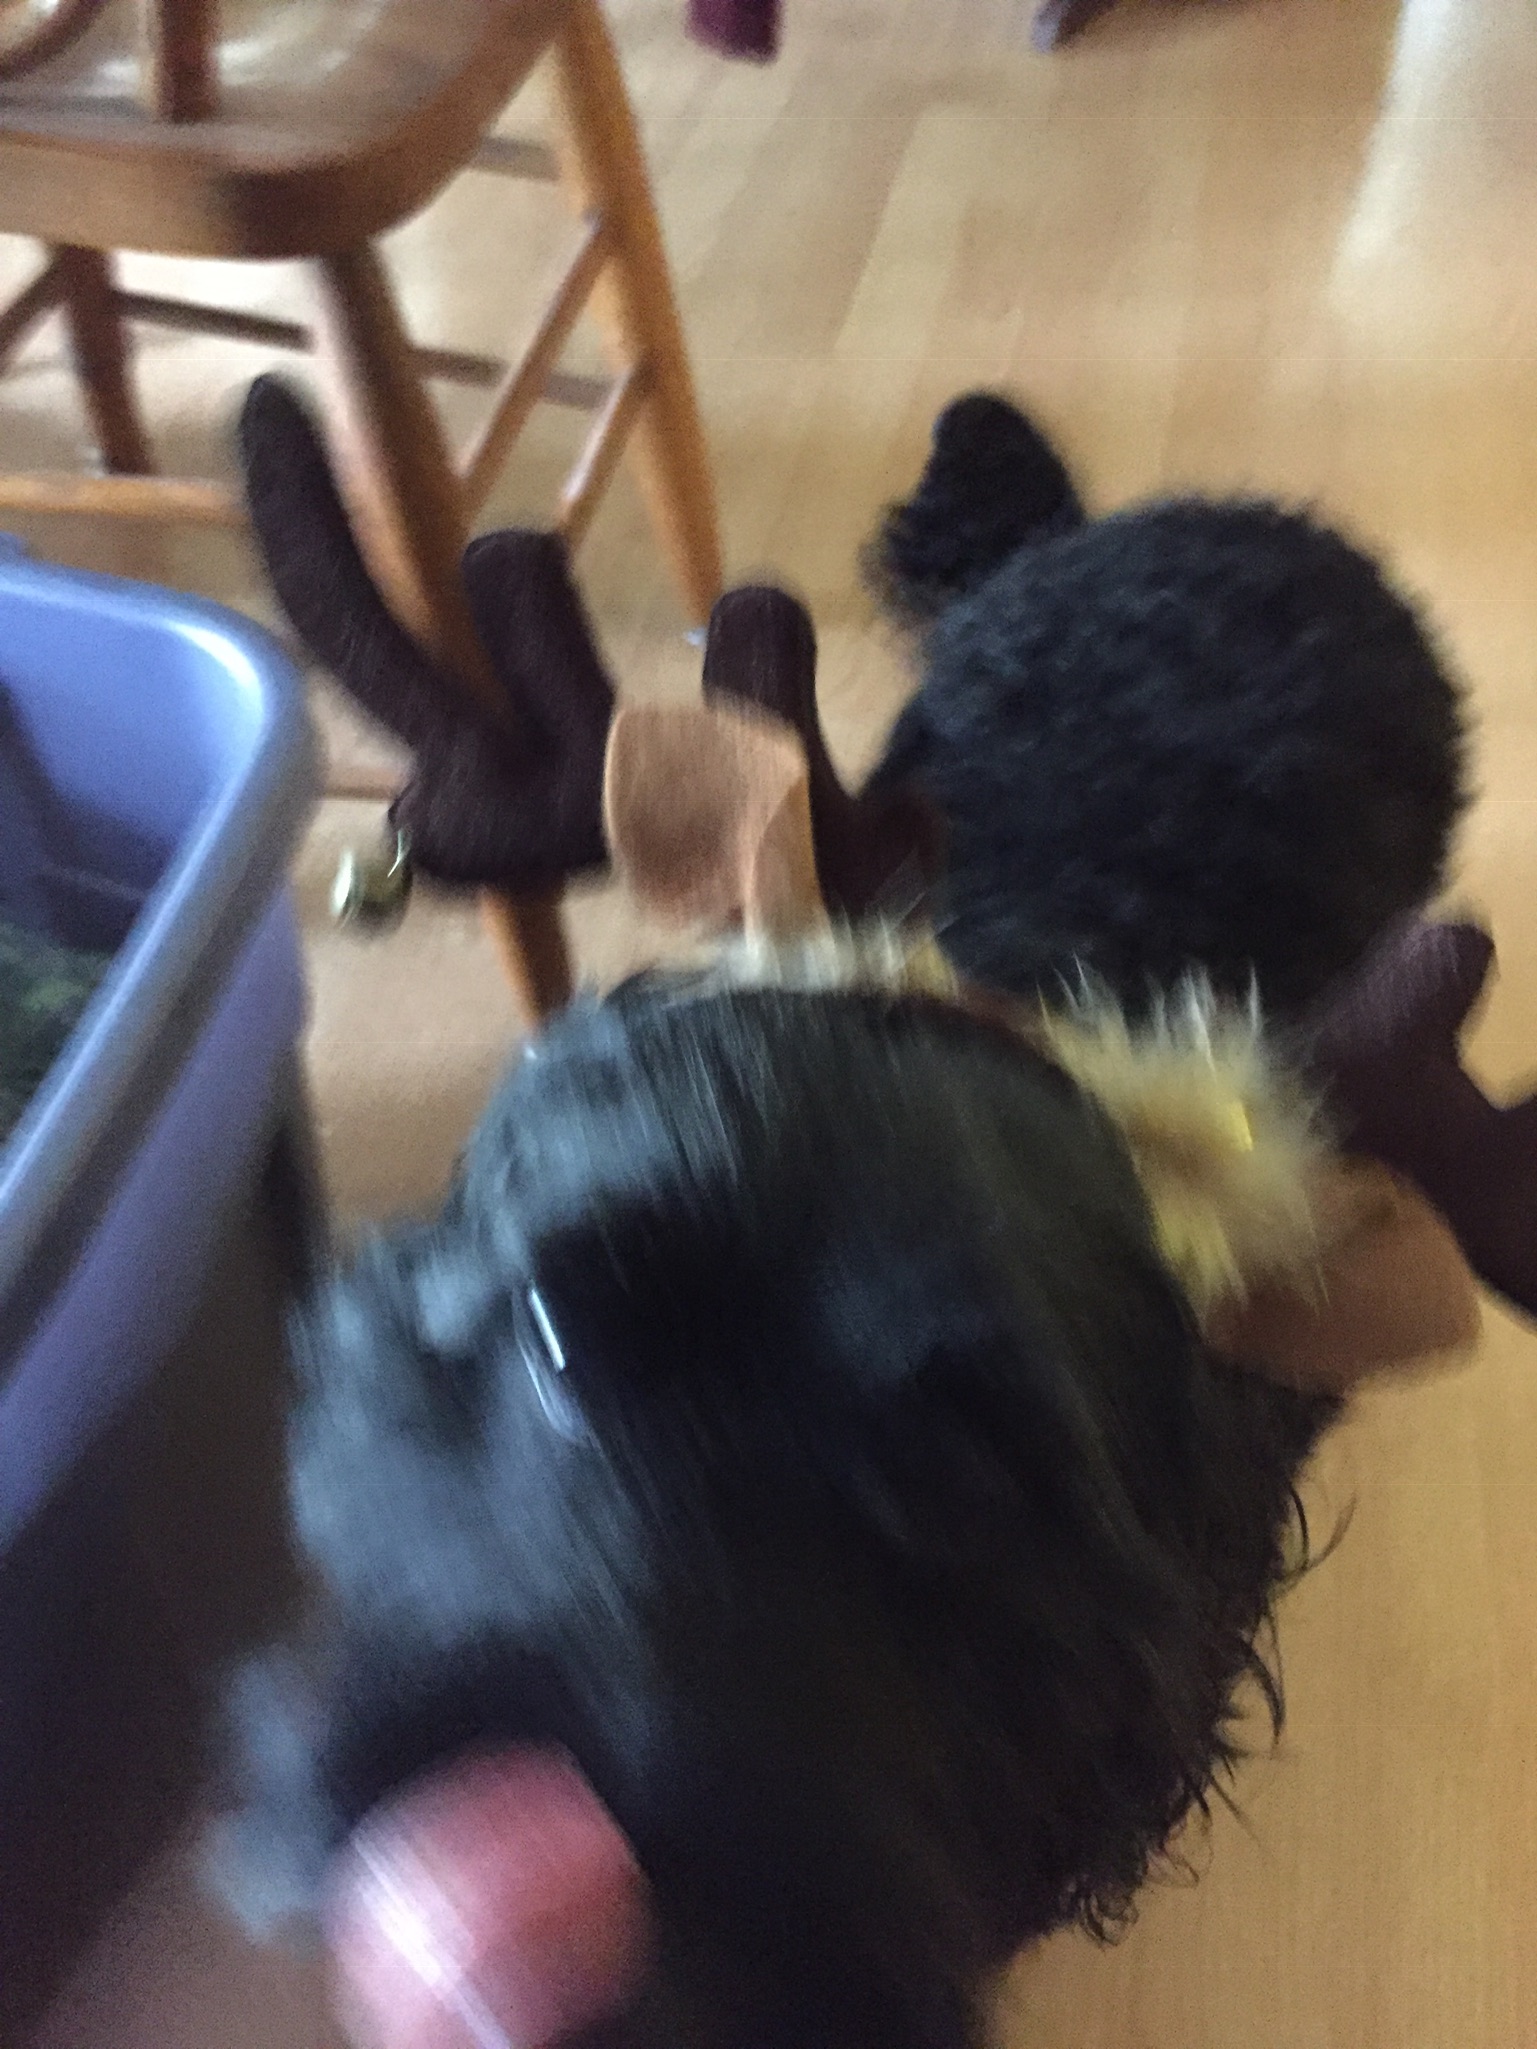 blurry photo of black dog with reindeer antlers on her head, licking her own nose